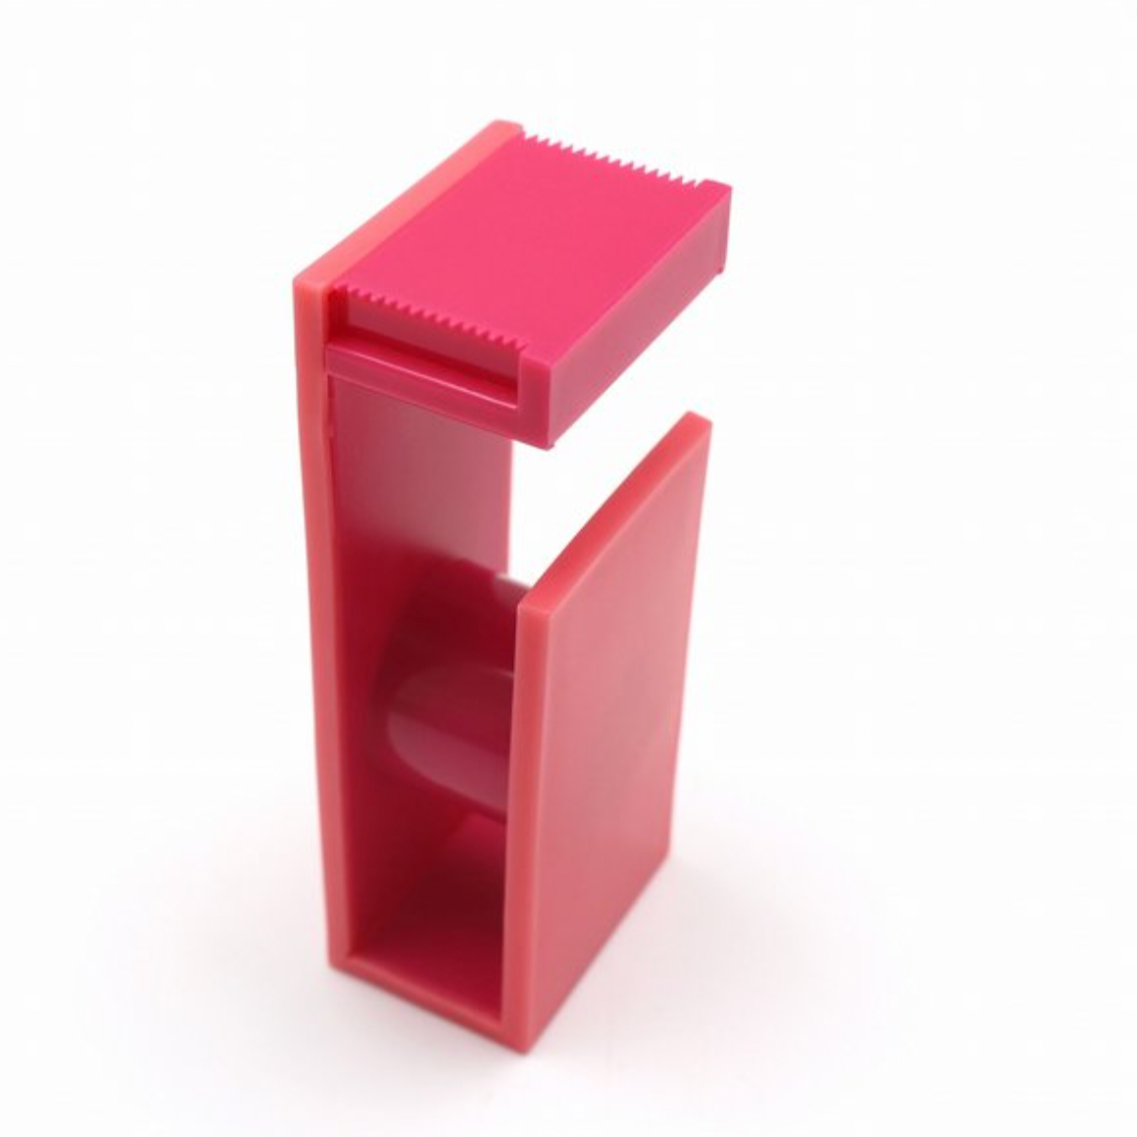 mt Tape Cutter - Coral/Pink